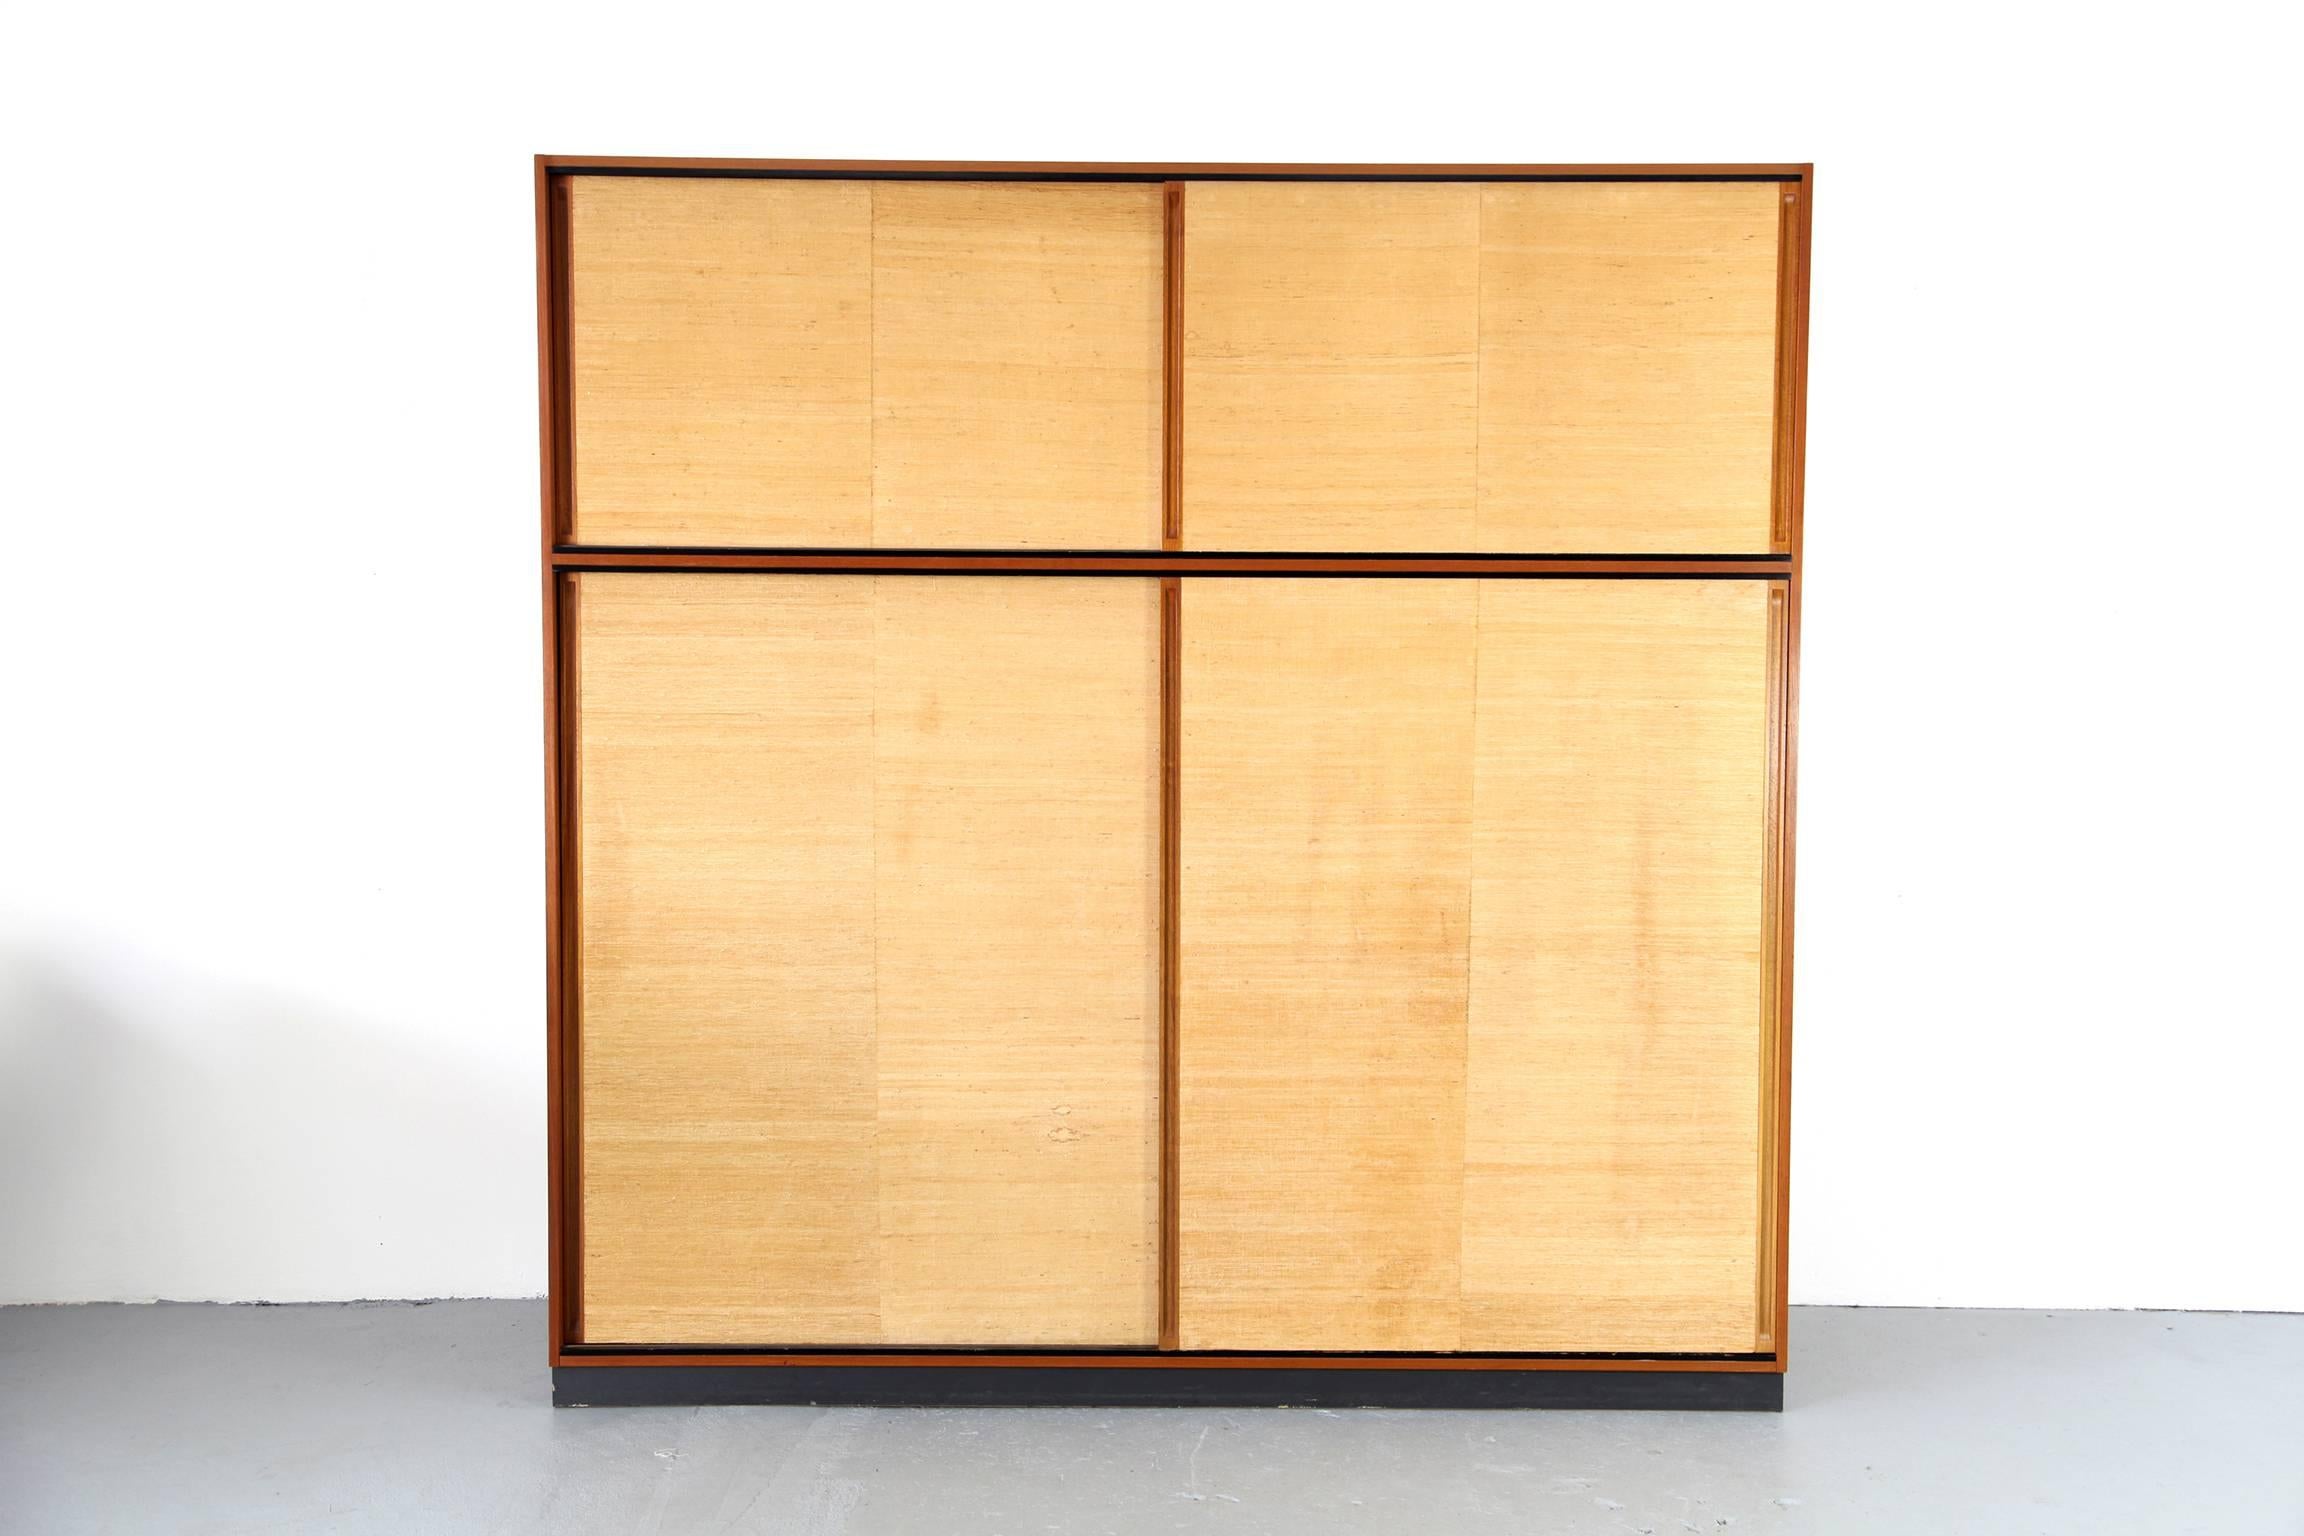 Rare wardrobe by Dieter Waeckerlin for Behr Möbel, Germany. Body made of teak, sliding doors covered with fine seaweed. Very practical layout of the compartments.
 